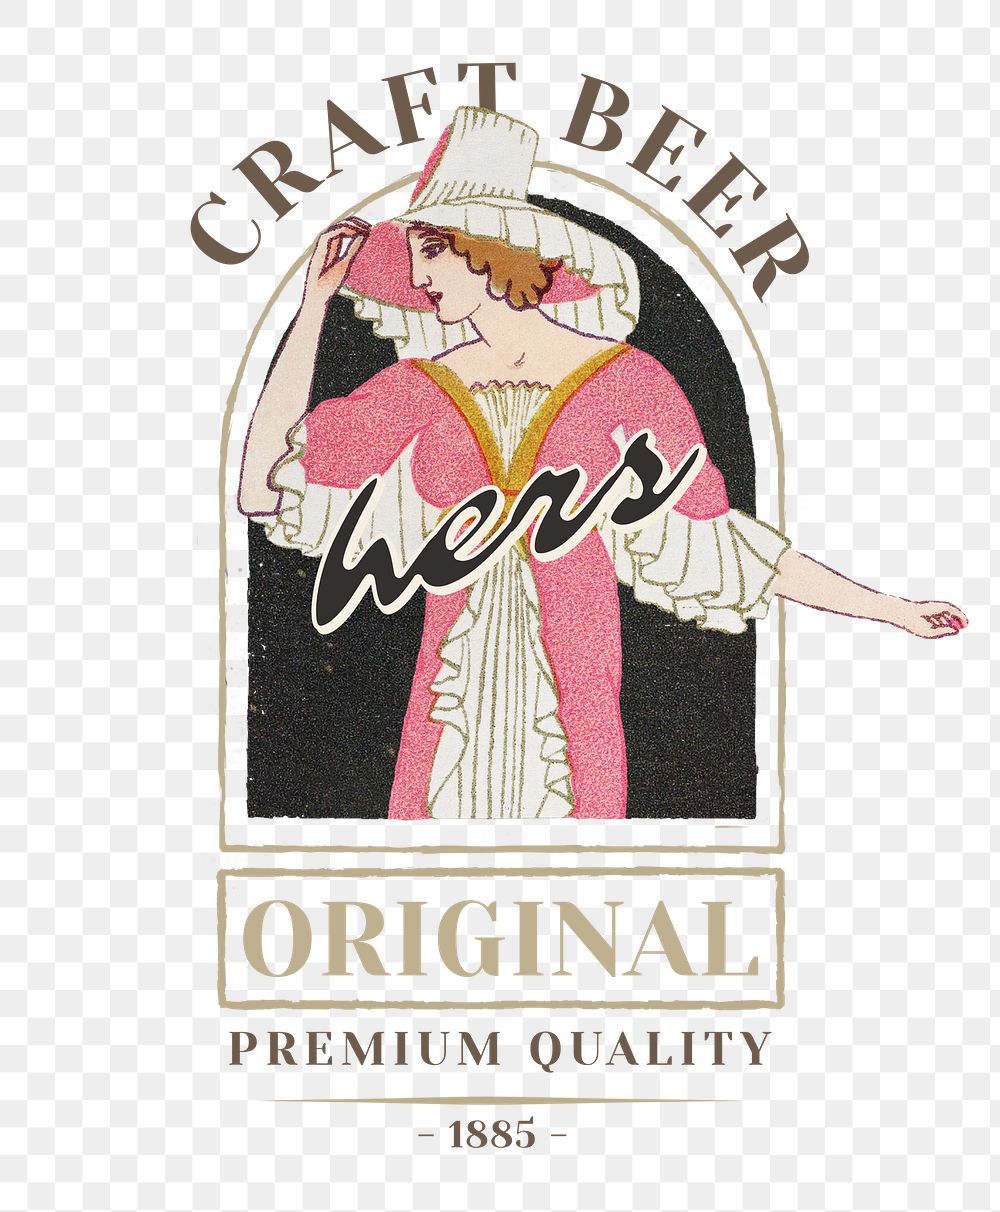 Png badge with vintage woman on craft beer logo design, remixed from the artworks by Otto Friedrich Carl Lendecke